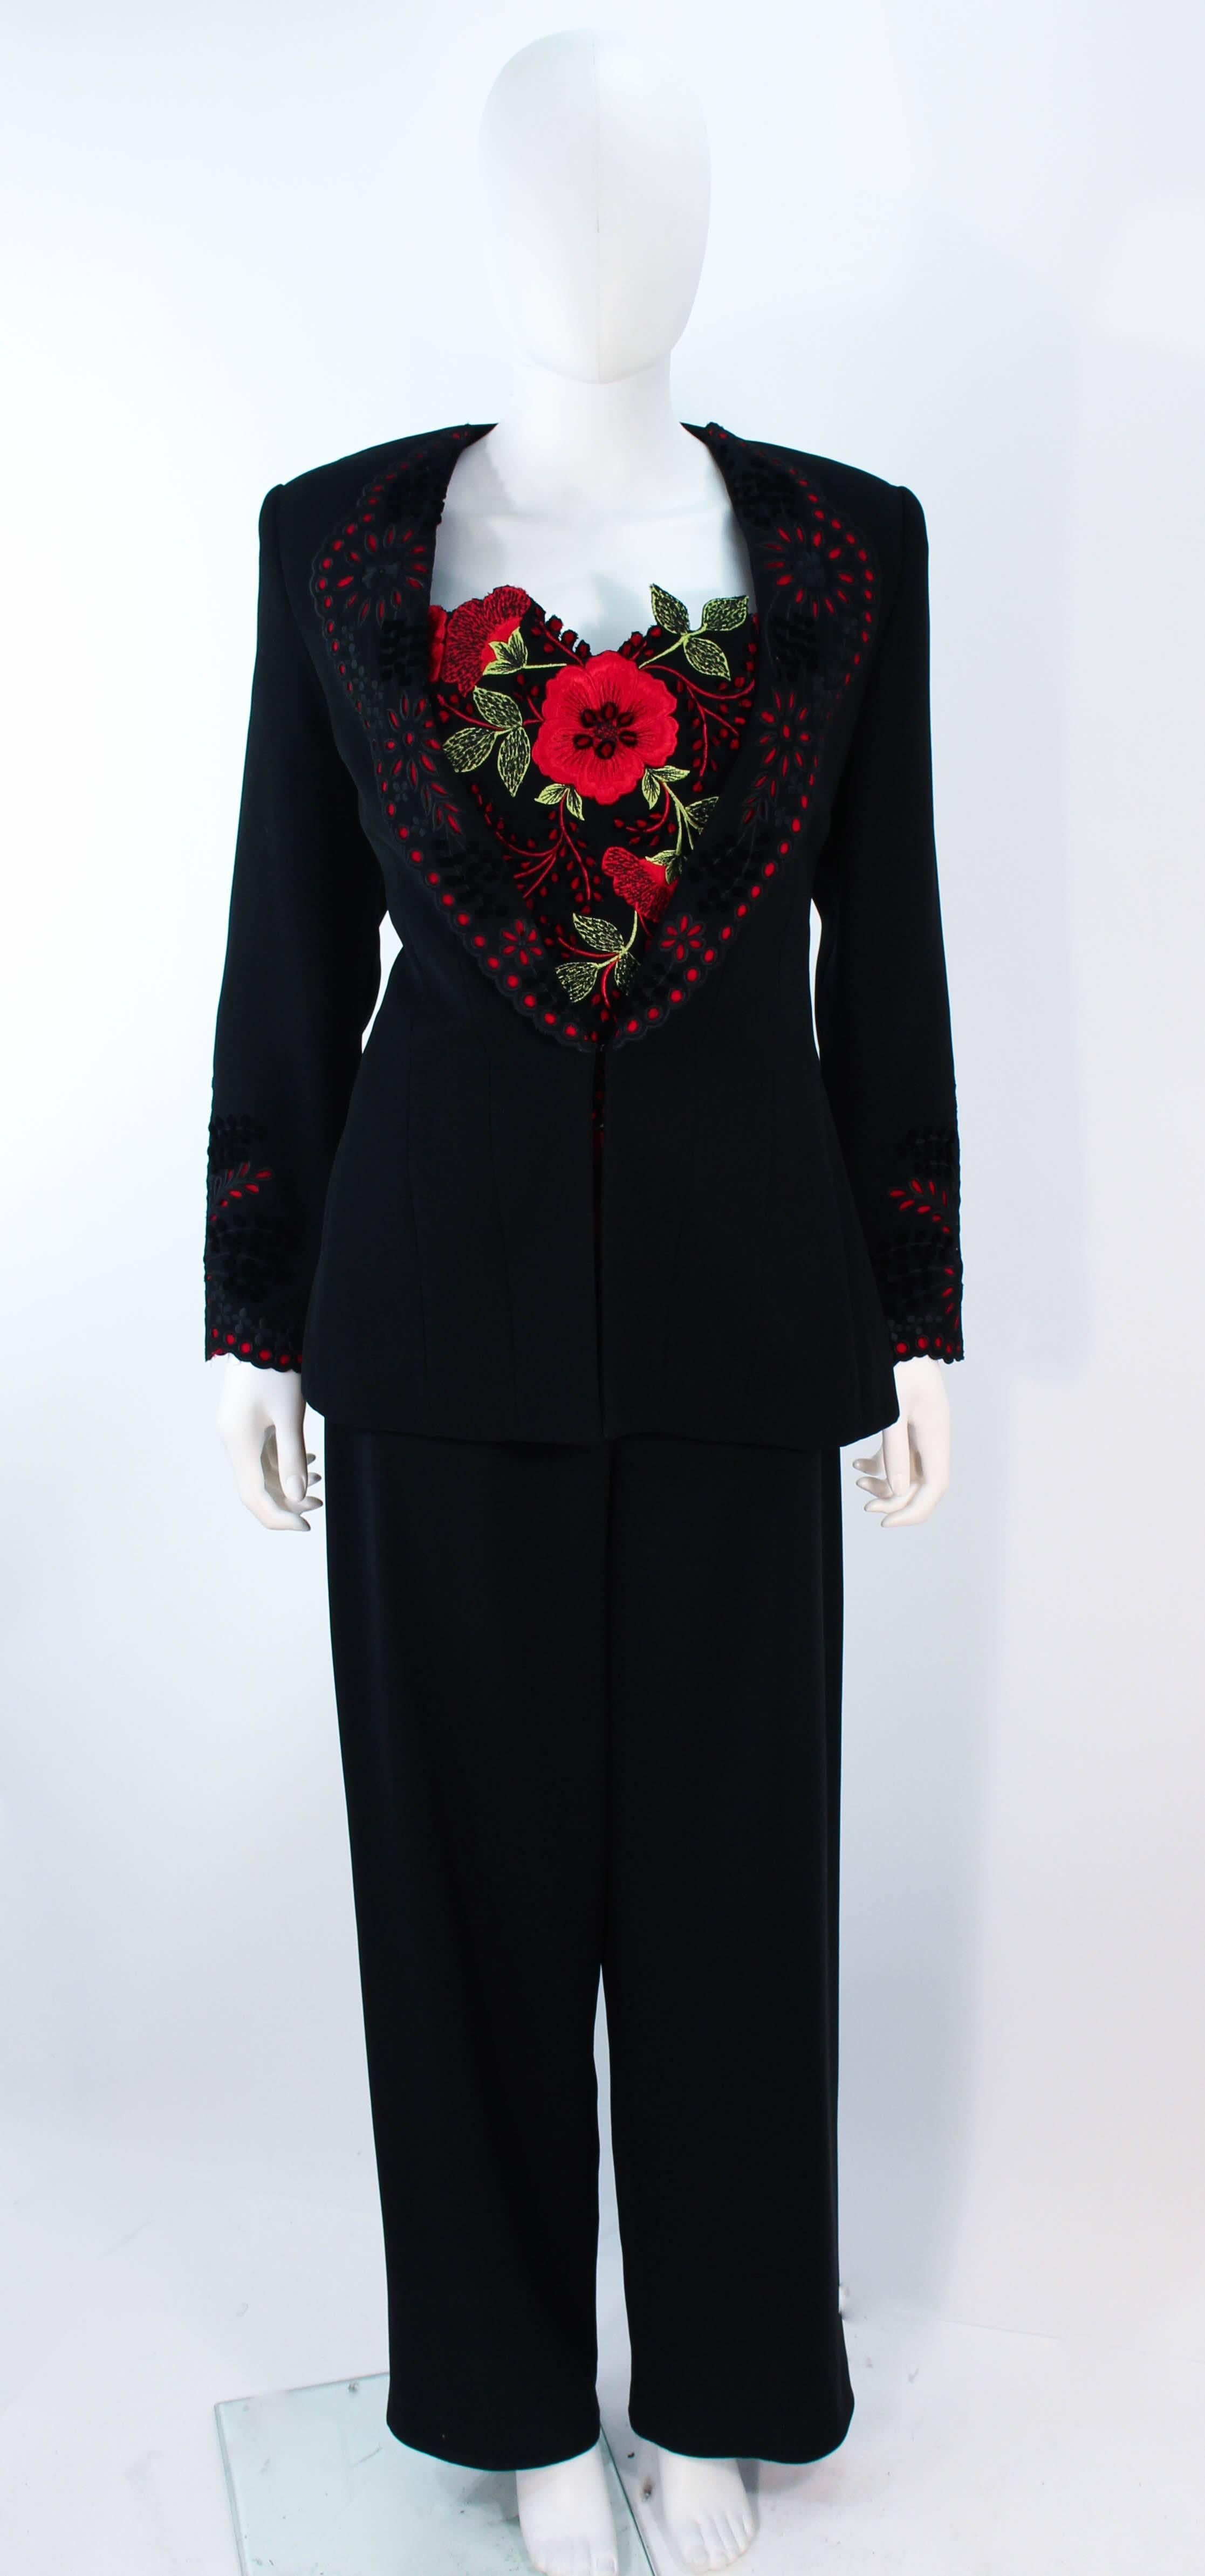 This Fe Zandi suit is composed of a black fabric with red lac/ eyelet accents. Features a stunning floral bustier with a center back zipper closure. The jacket has a lace trim collar with hook and eye closure. The pants have a side zipper closure.